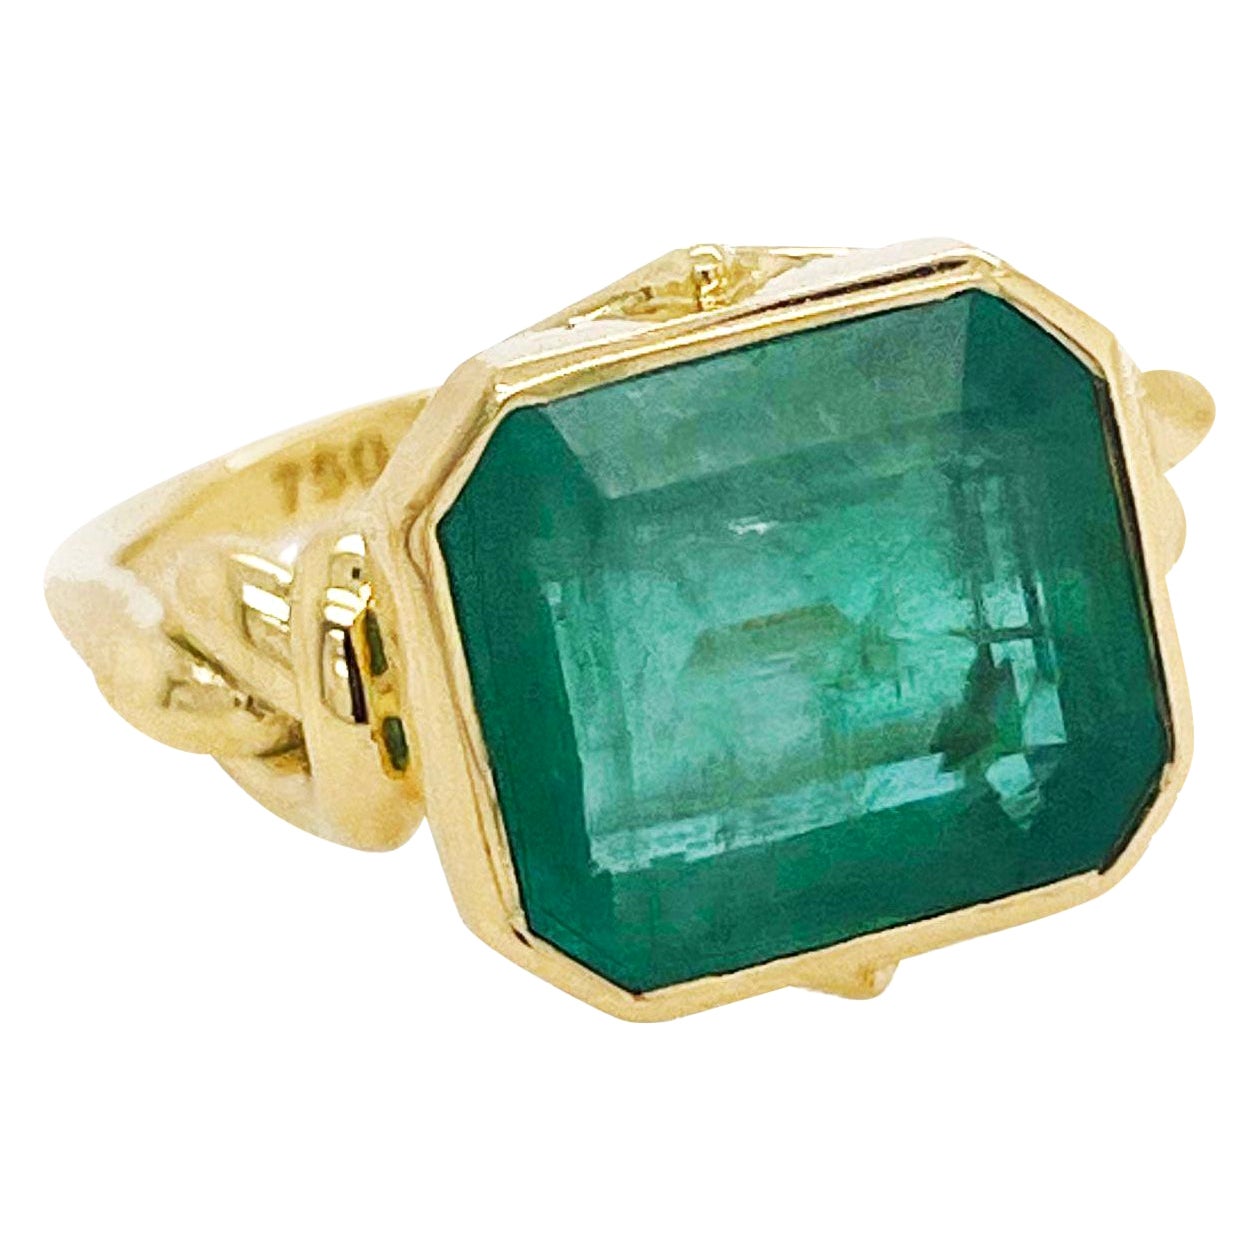 Artist 8ct Emerald Ring in 18ct Yellow Gold